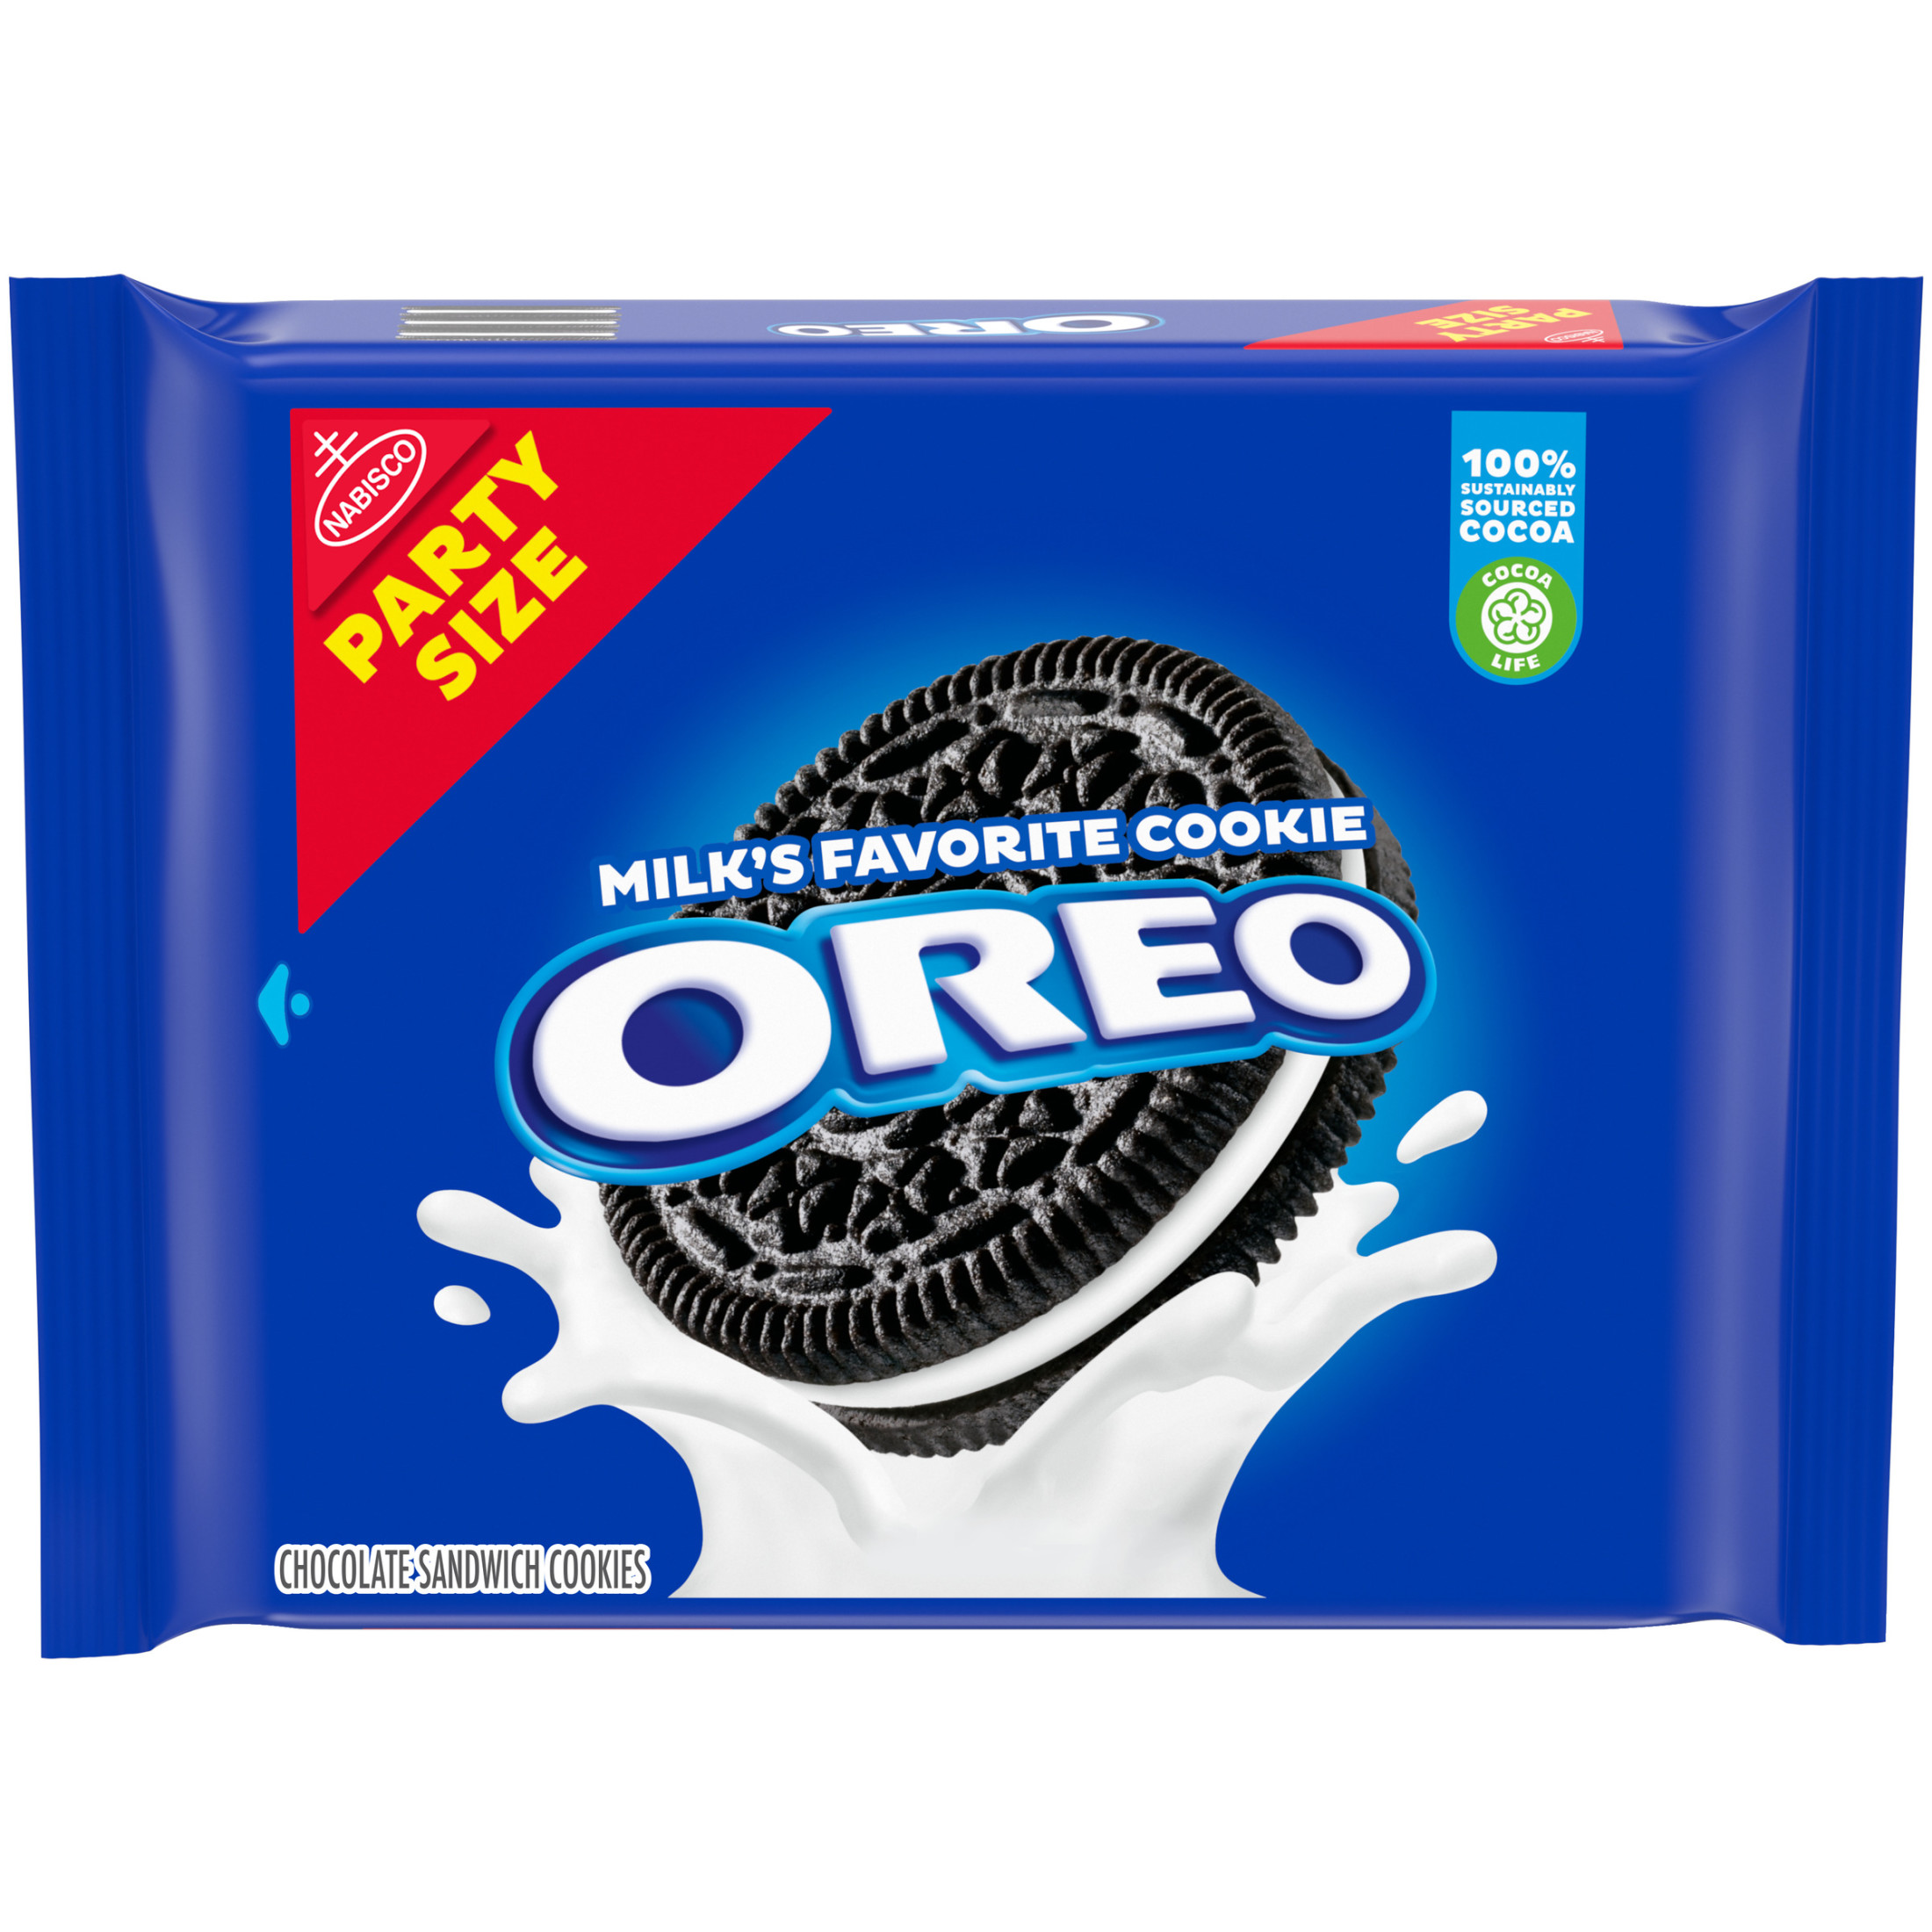 OREO Chocolate Sandwich Cookies, Party Size, 25.5 oz - image 1 of 15